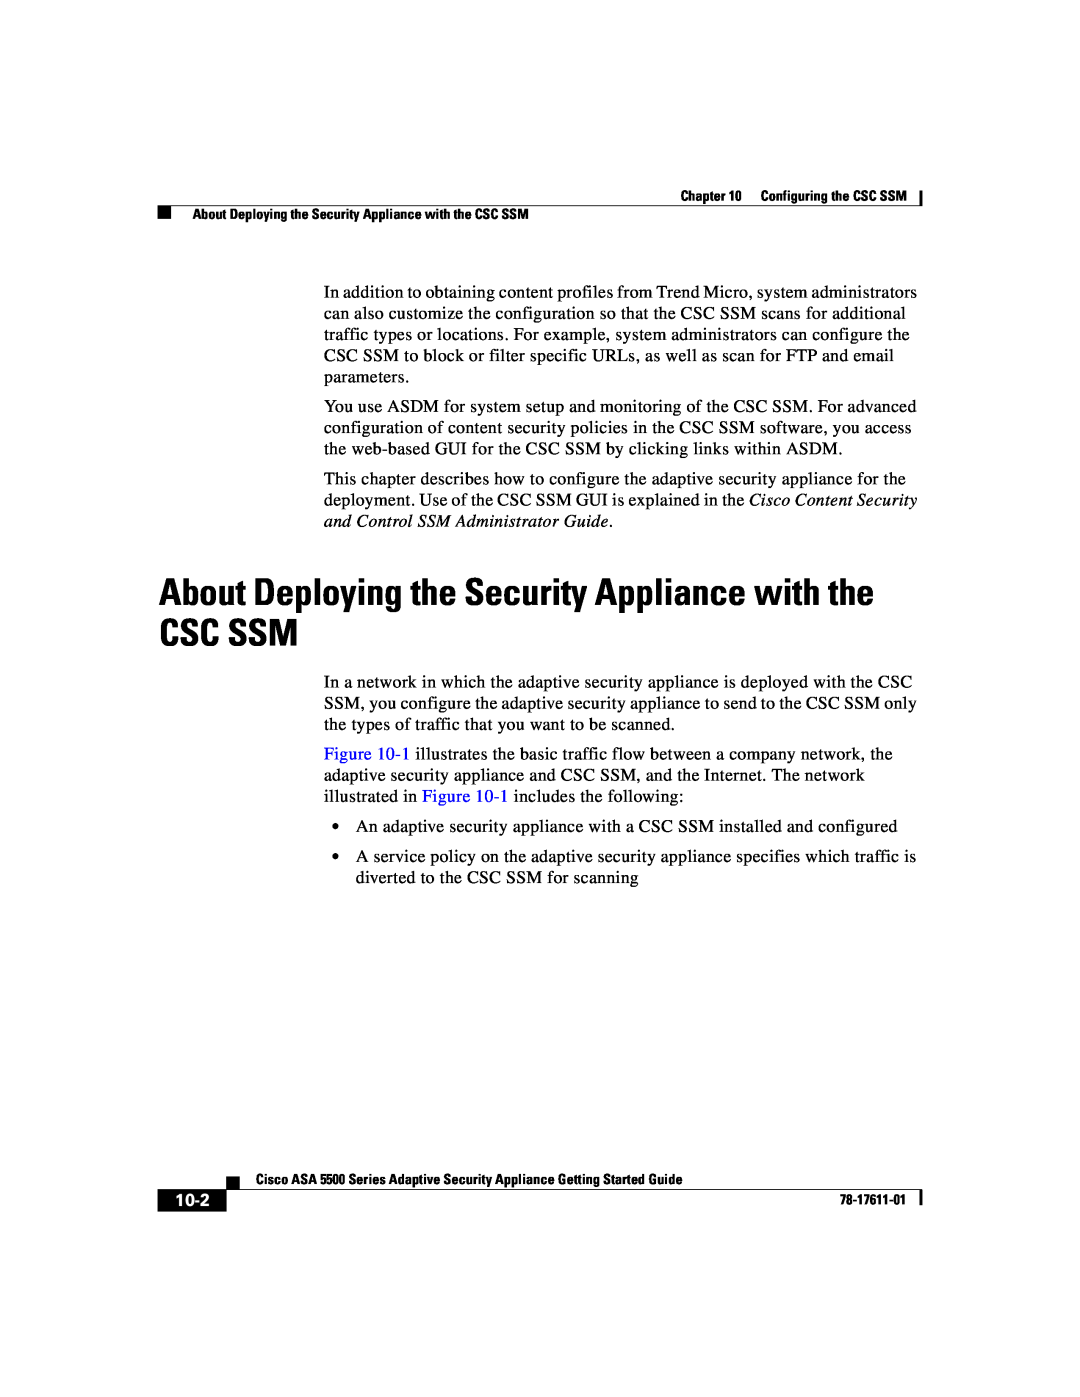 Cisco Systems ASA 5500 manual Csc Ssm, About Deploying the Security Appliance with the, 10-2 